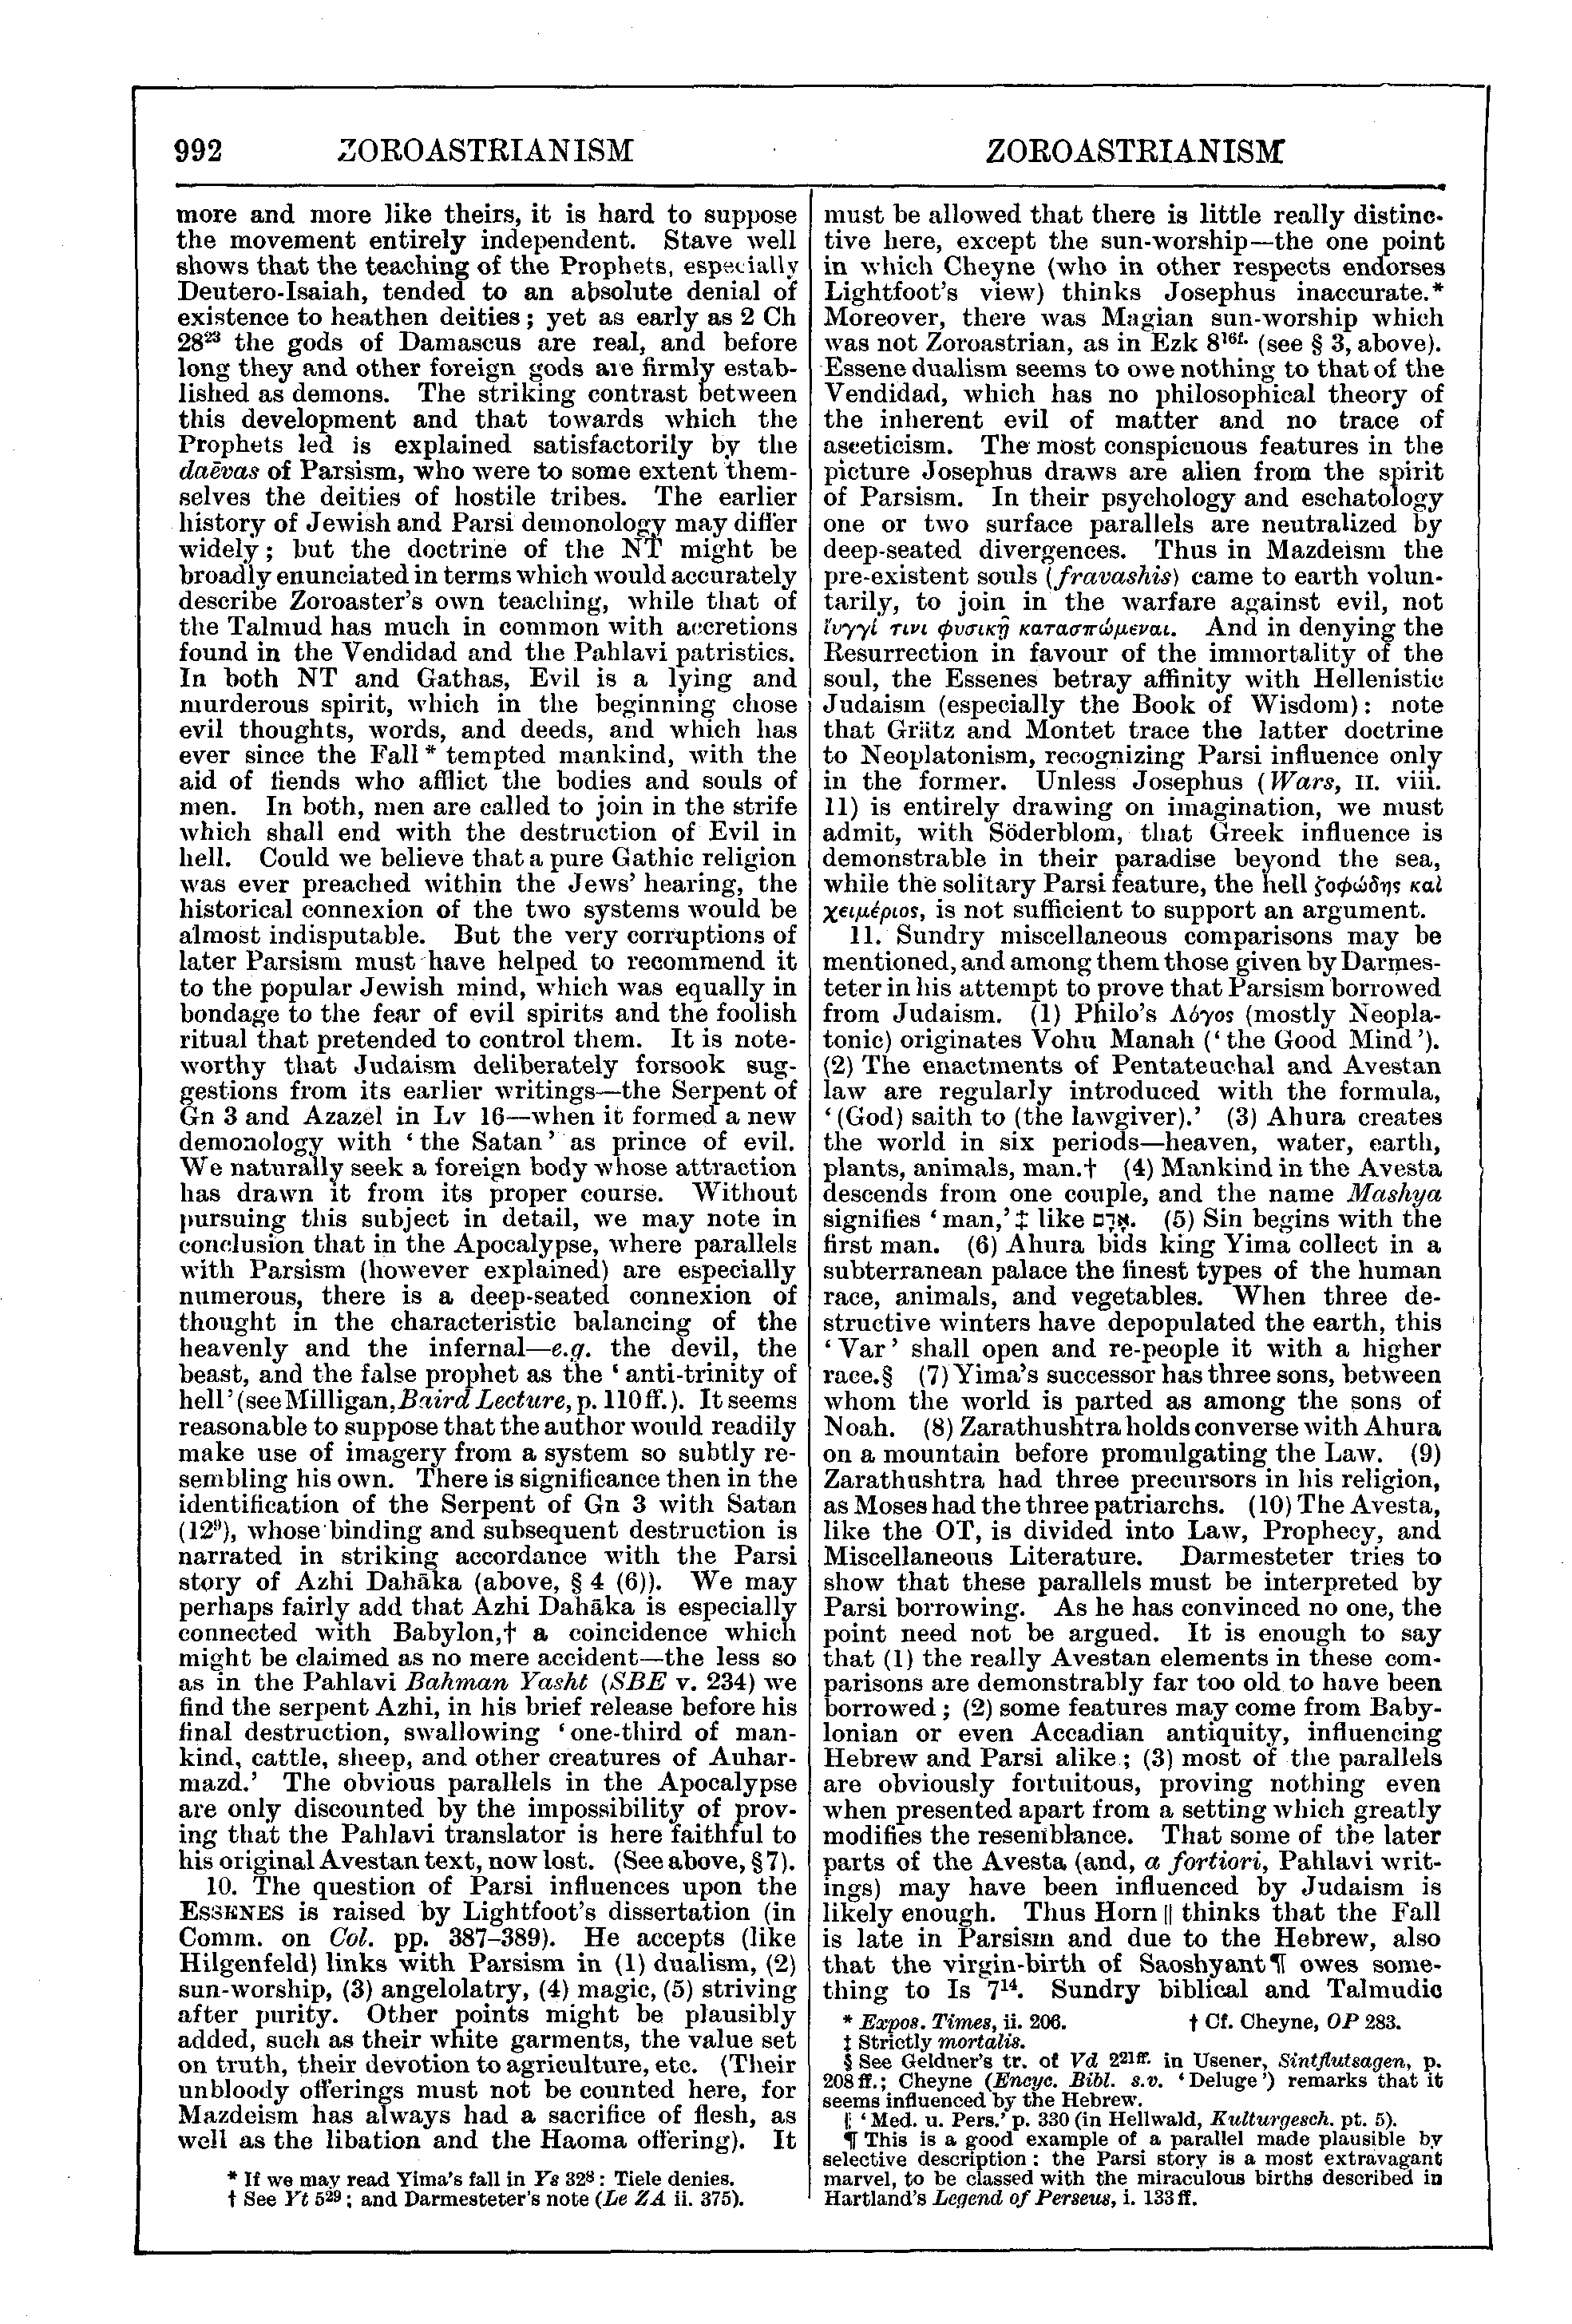 Image of page 992